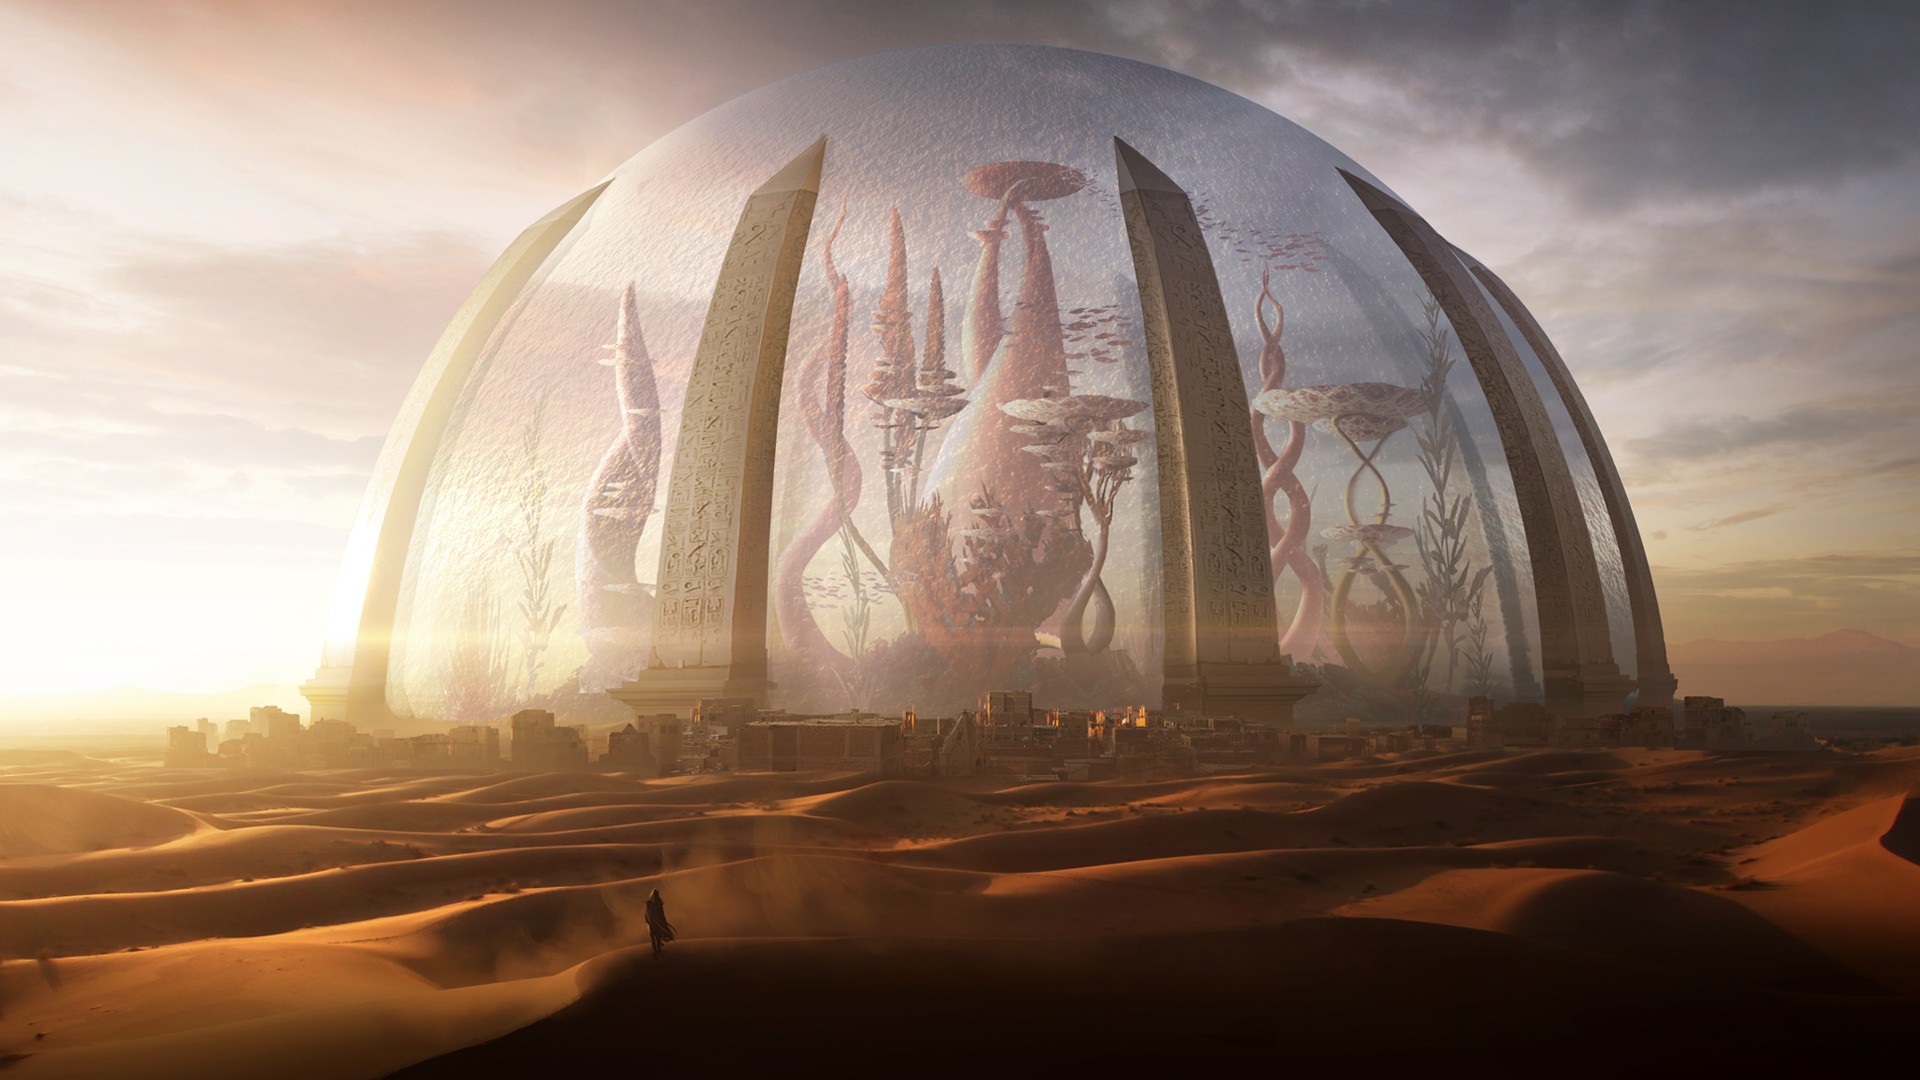 Video Game Torment: Tides Of Numenera HD Wallpaper | Background Image